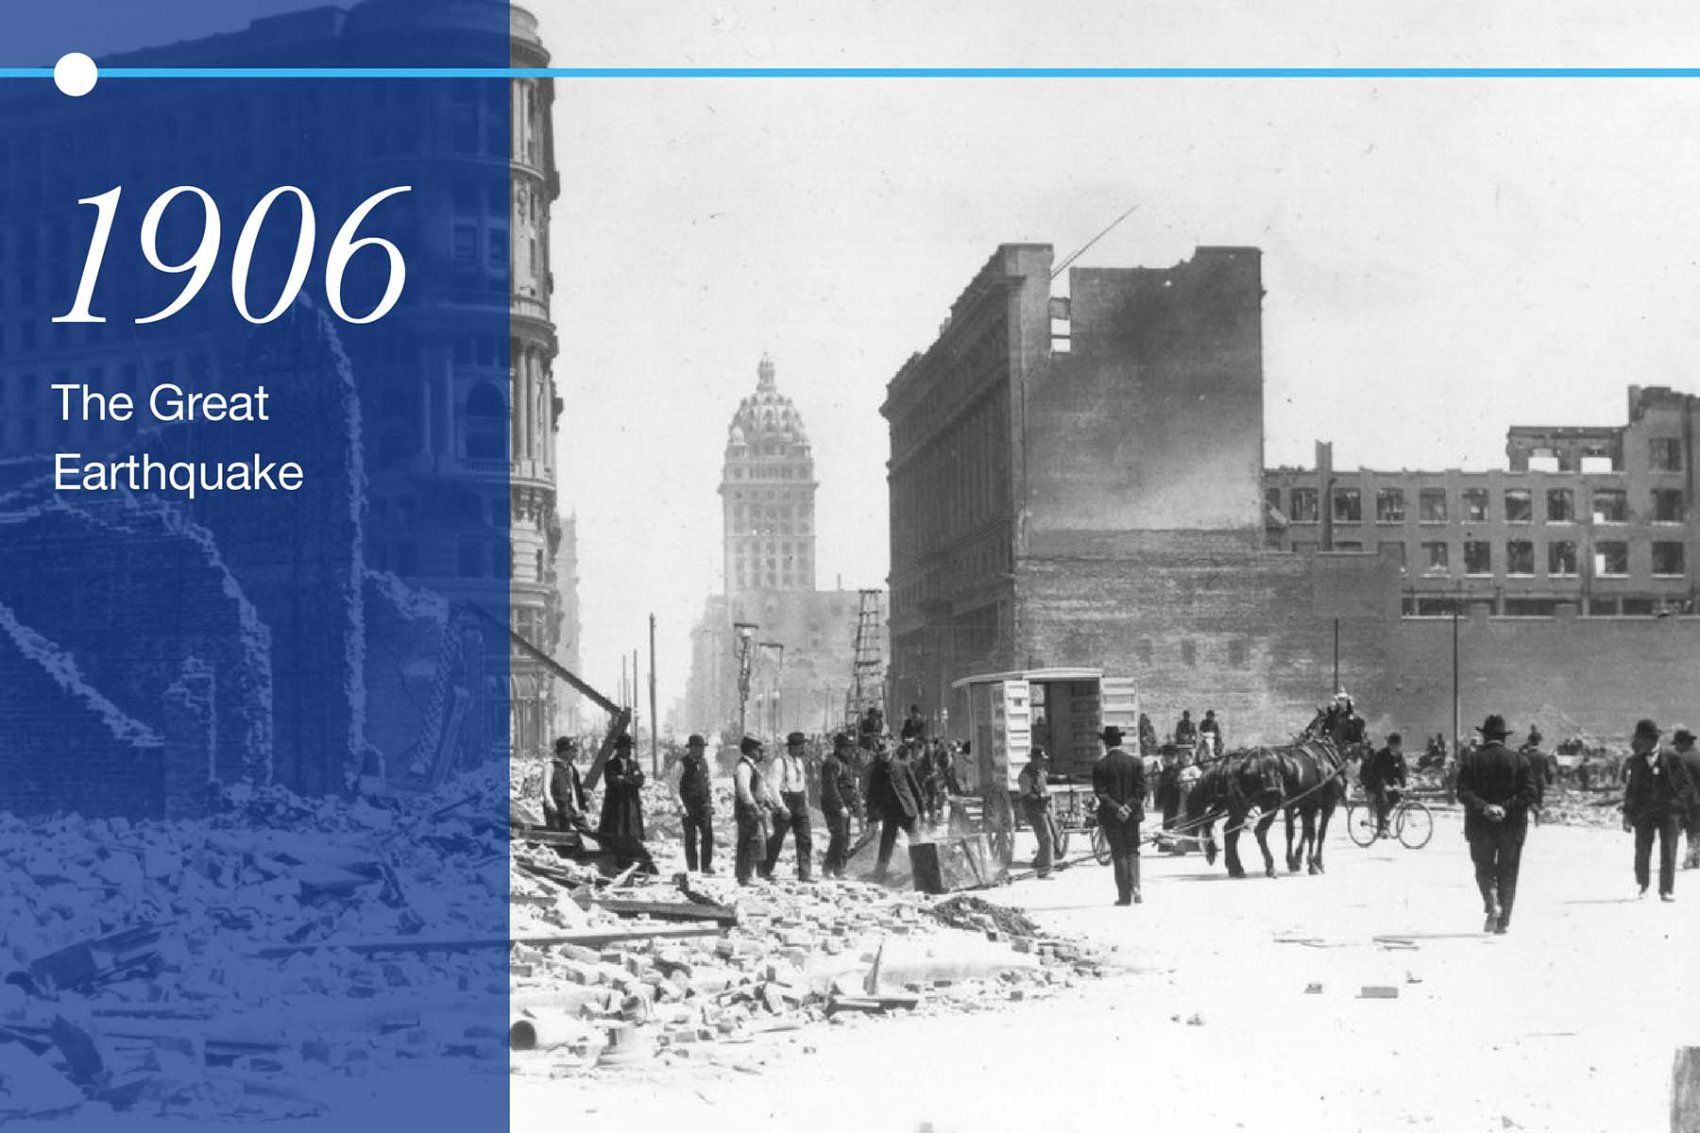 Market street is strewn with rubble after the 1906 earthquake